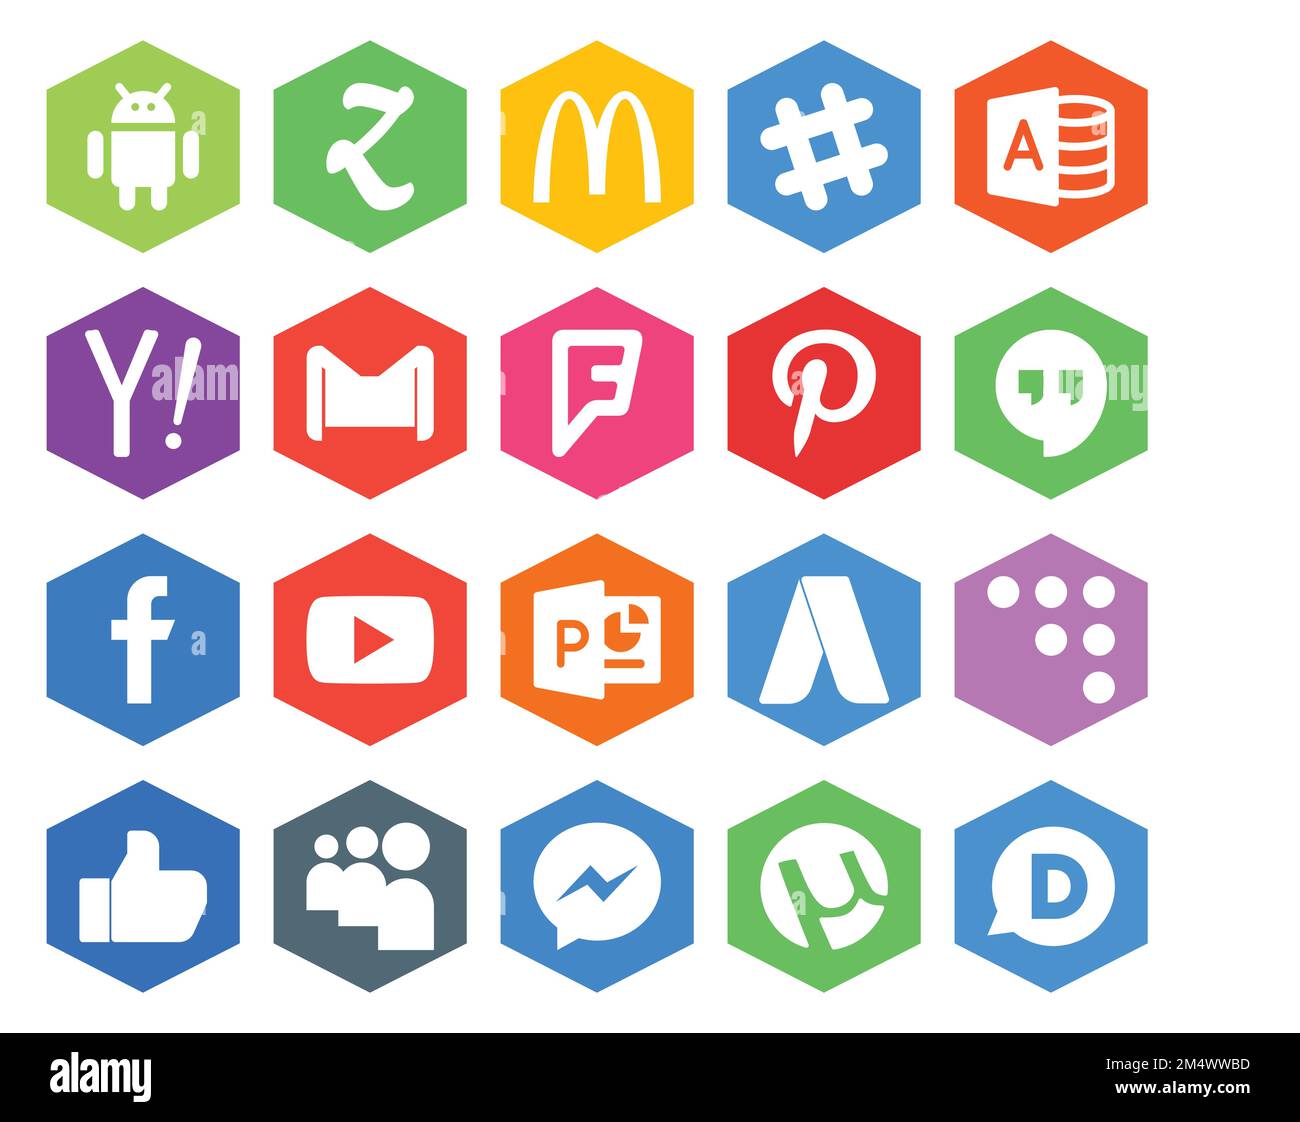 20 Social Media Icon Pack Including powerpoint. youtube. gmail. facebook. pinterest Stock Vector